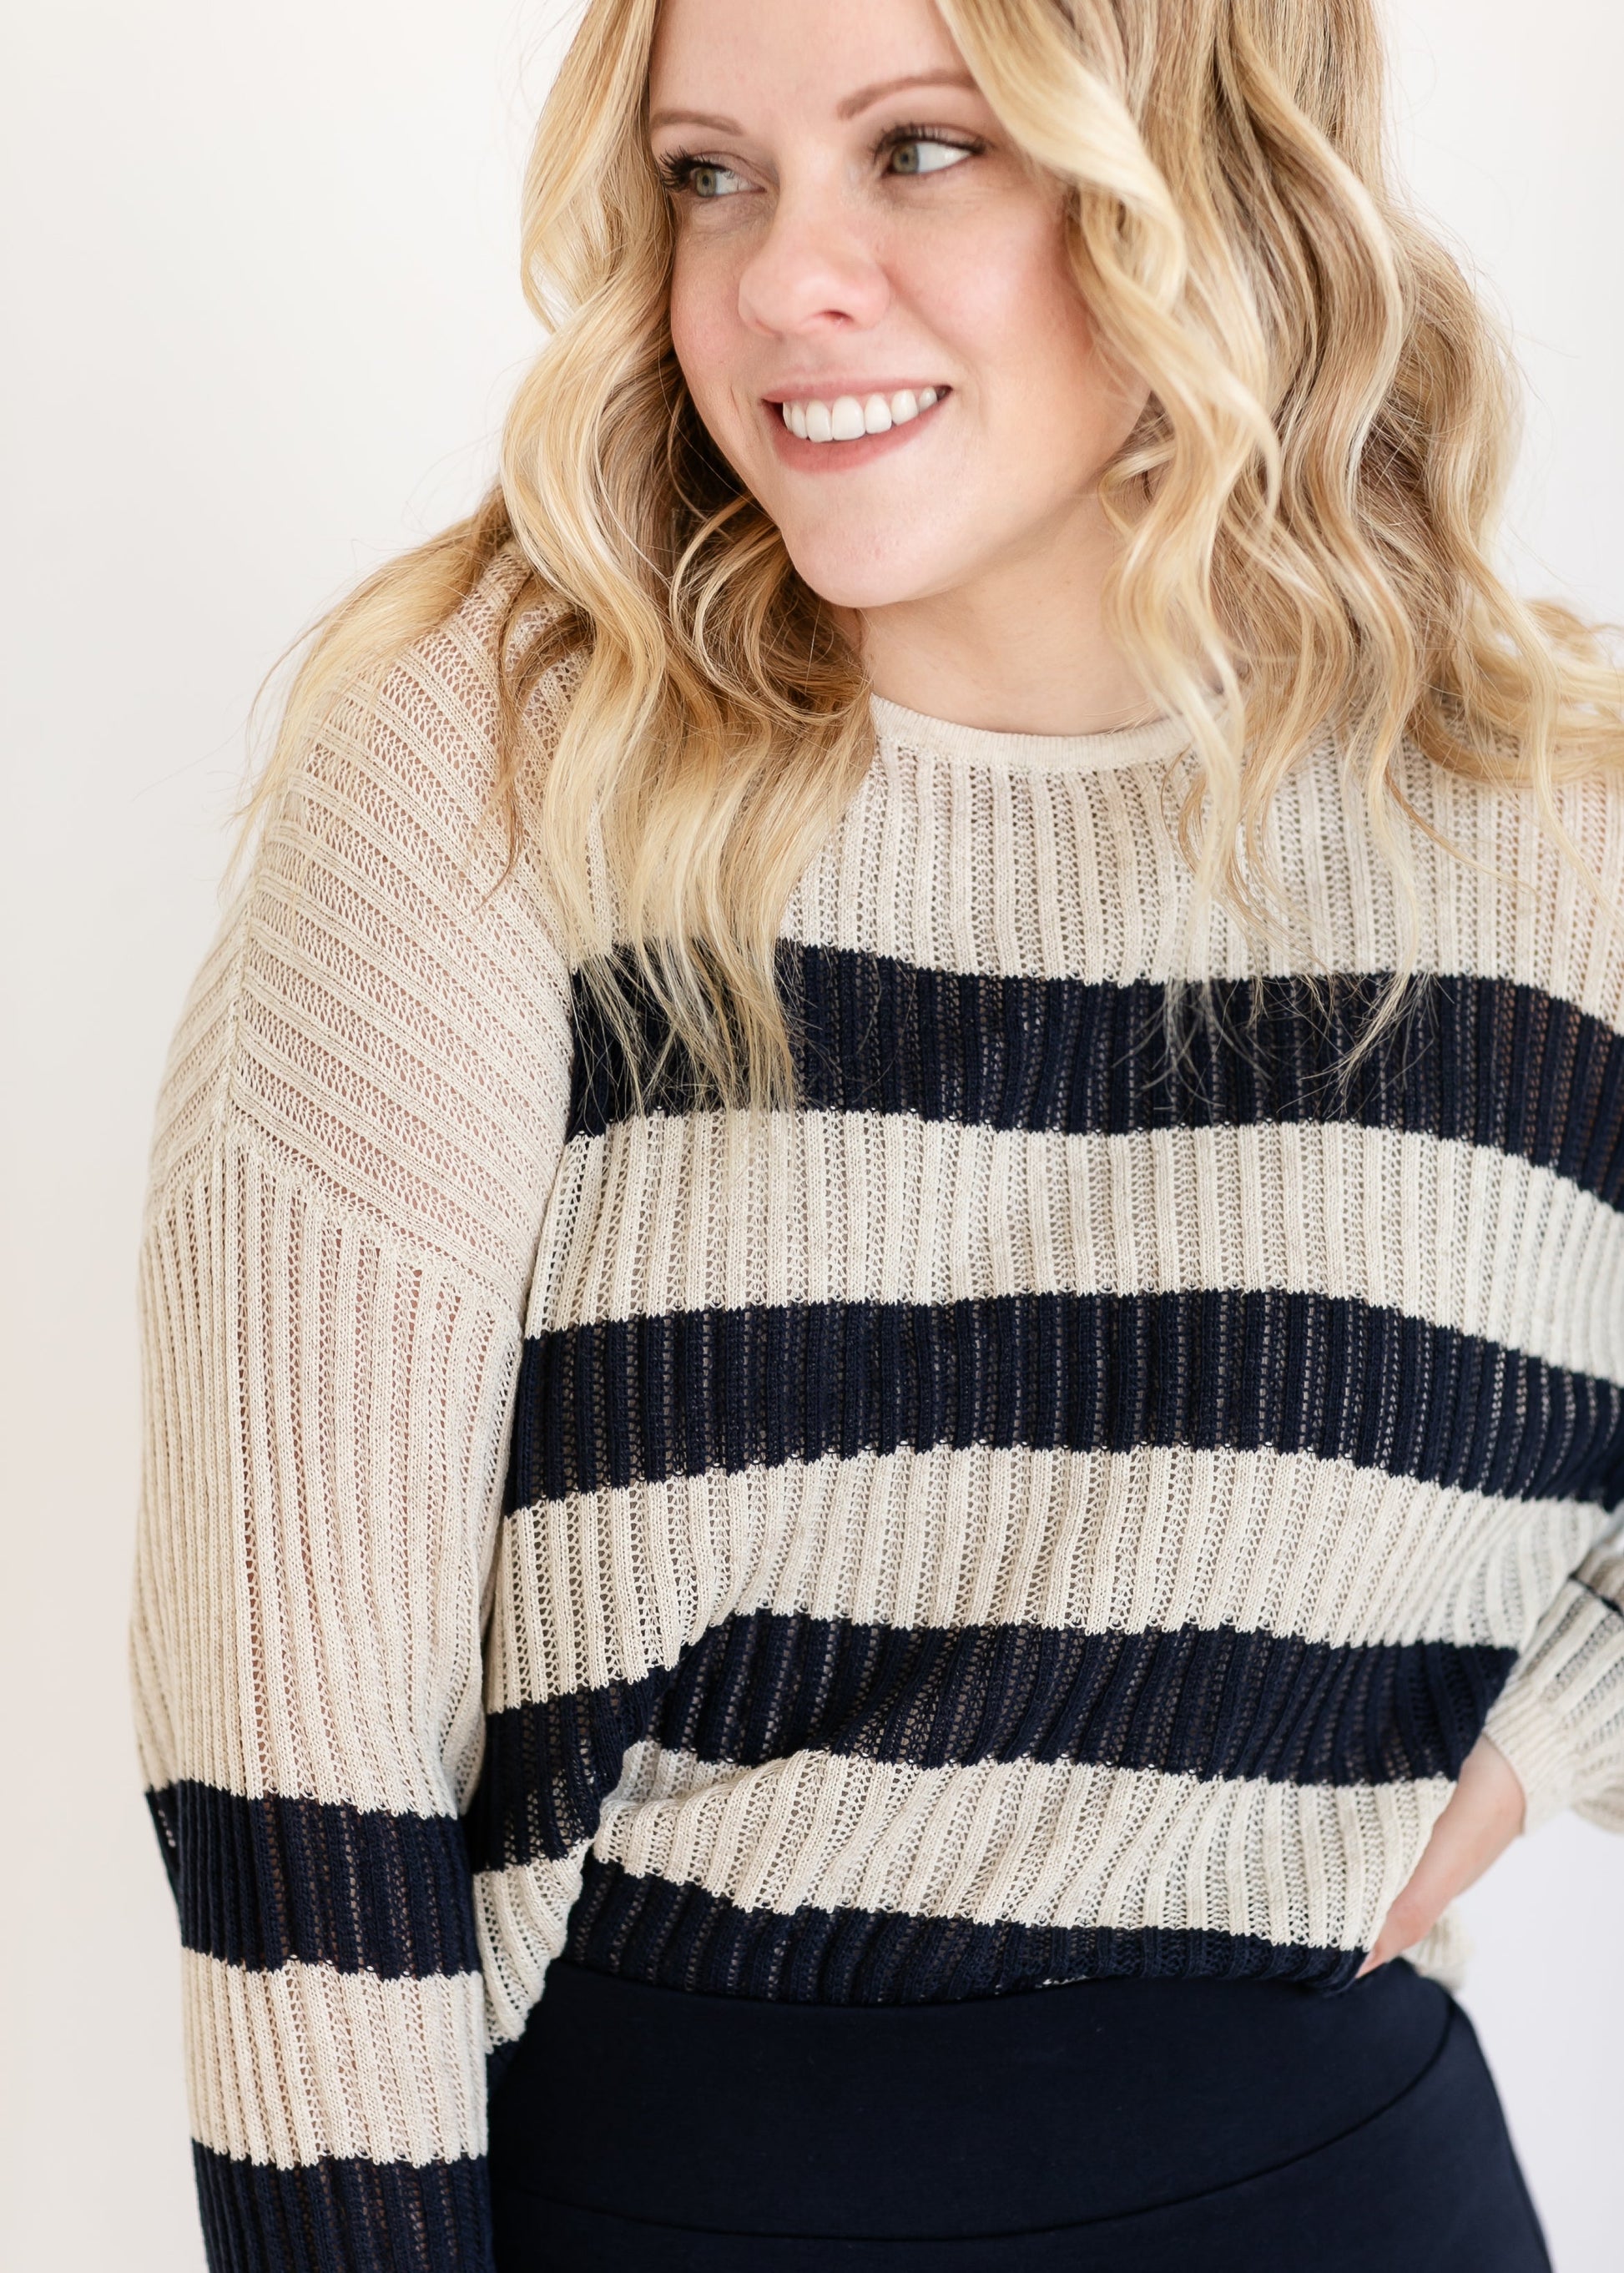 Navy Striped Long Sleeve Knit Sweater FF Tops